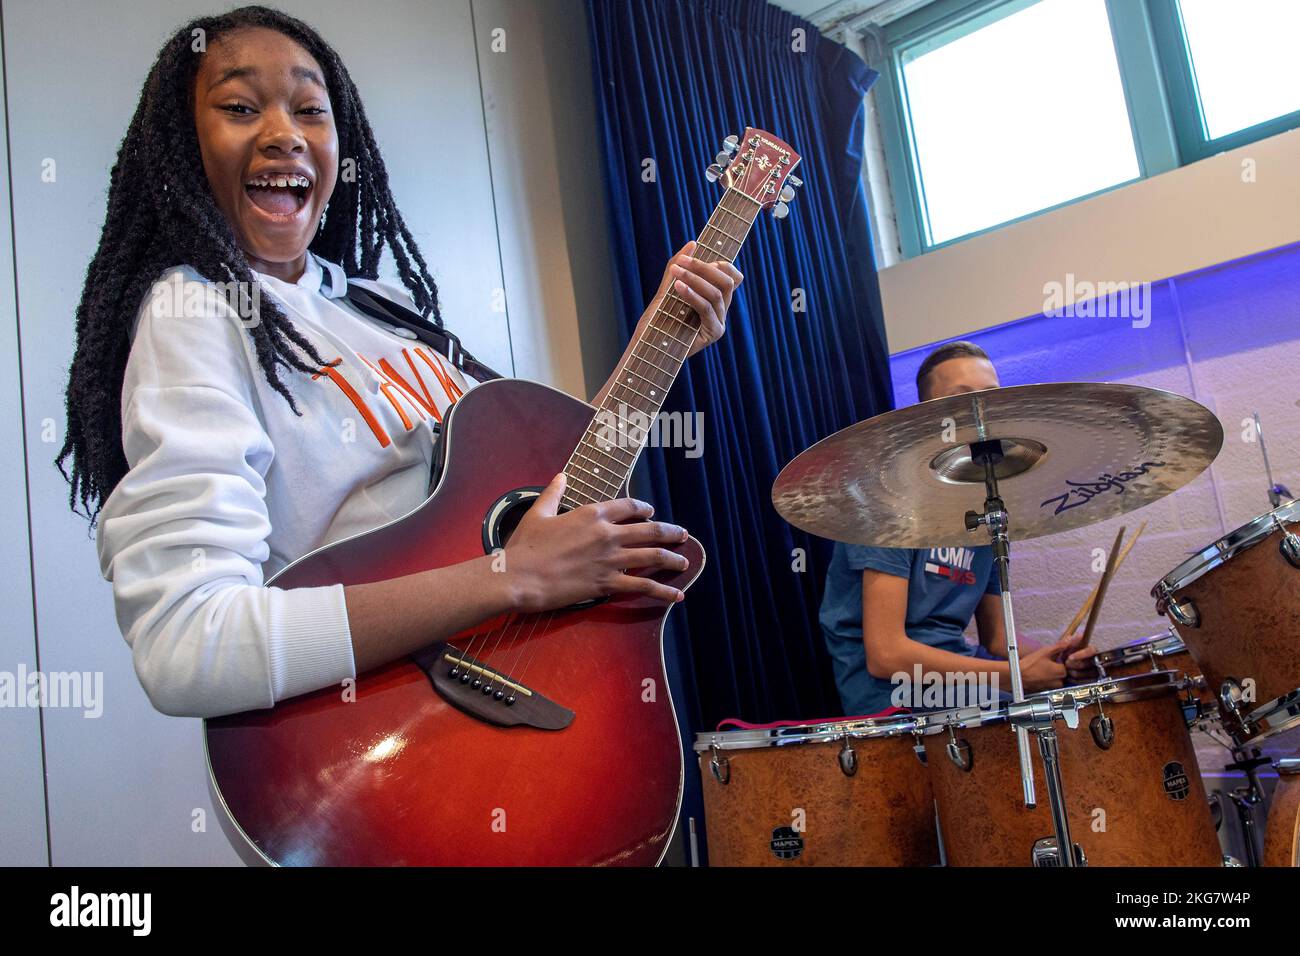 student on a secondary school plays her guitar during music lesson. holland. vvbvanbree fotografie . Stock Photo